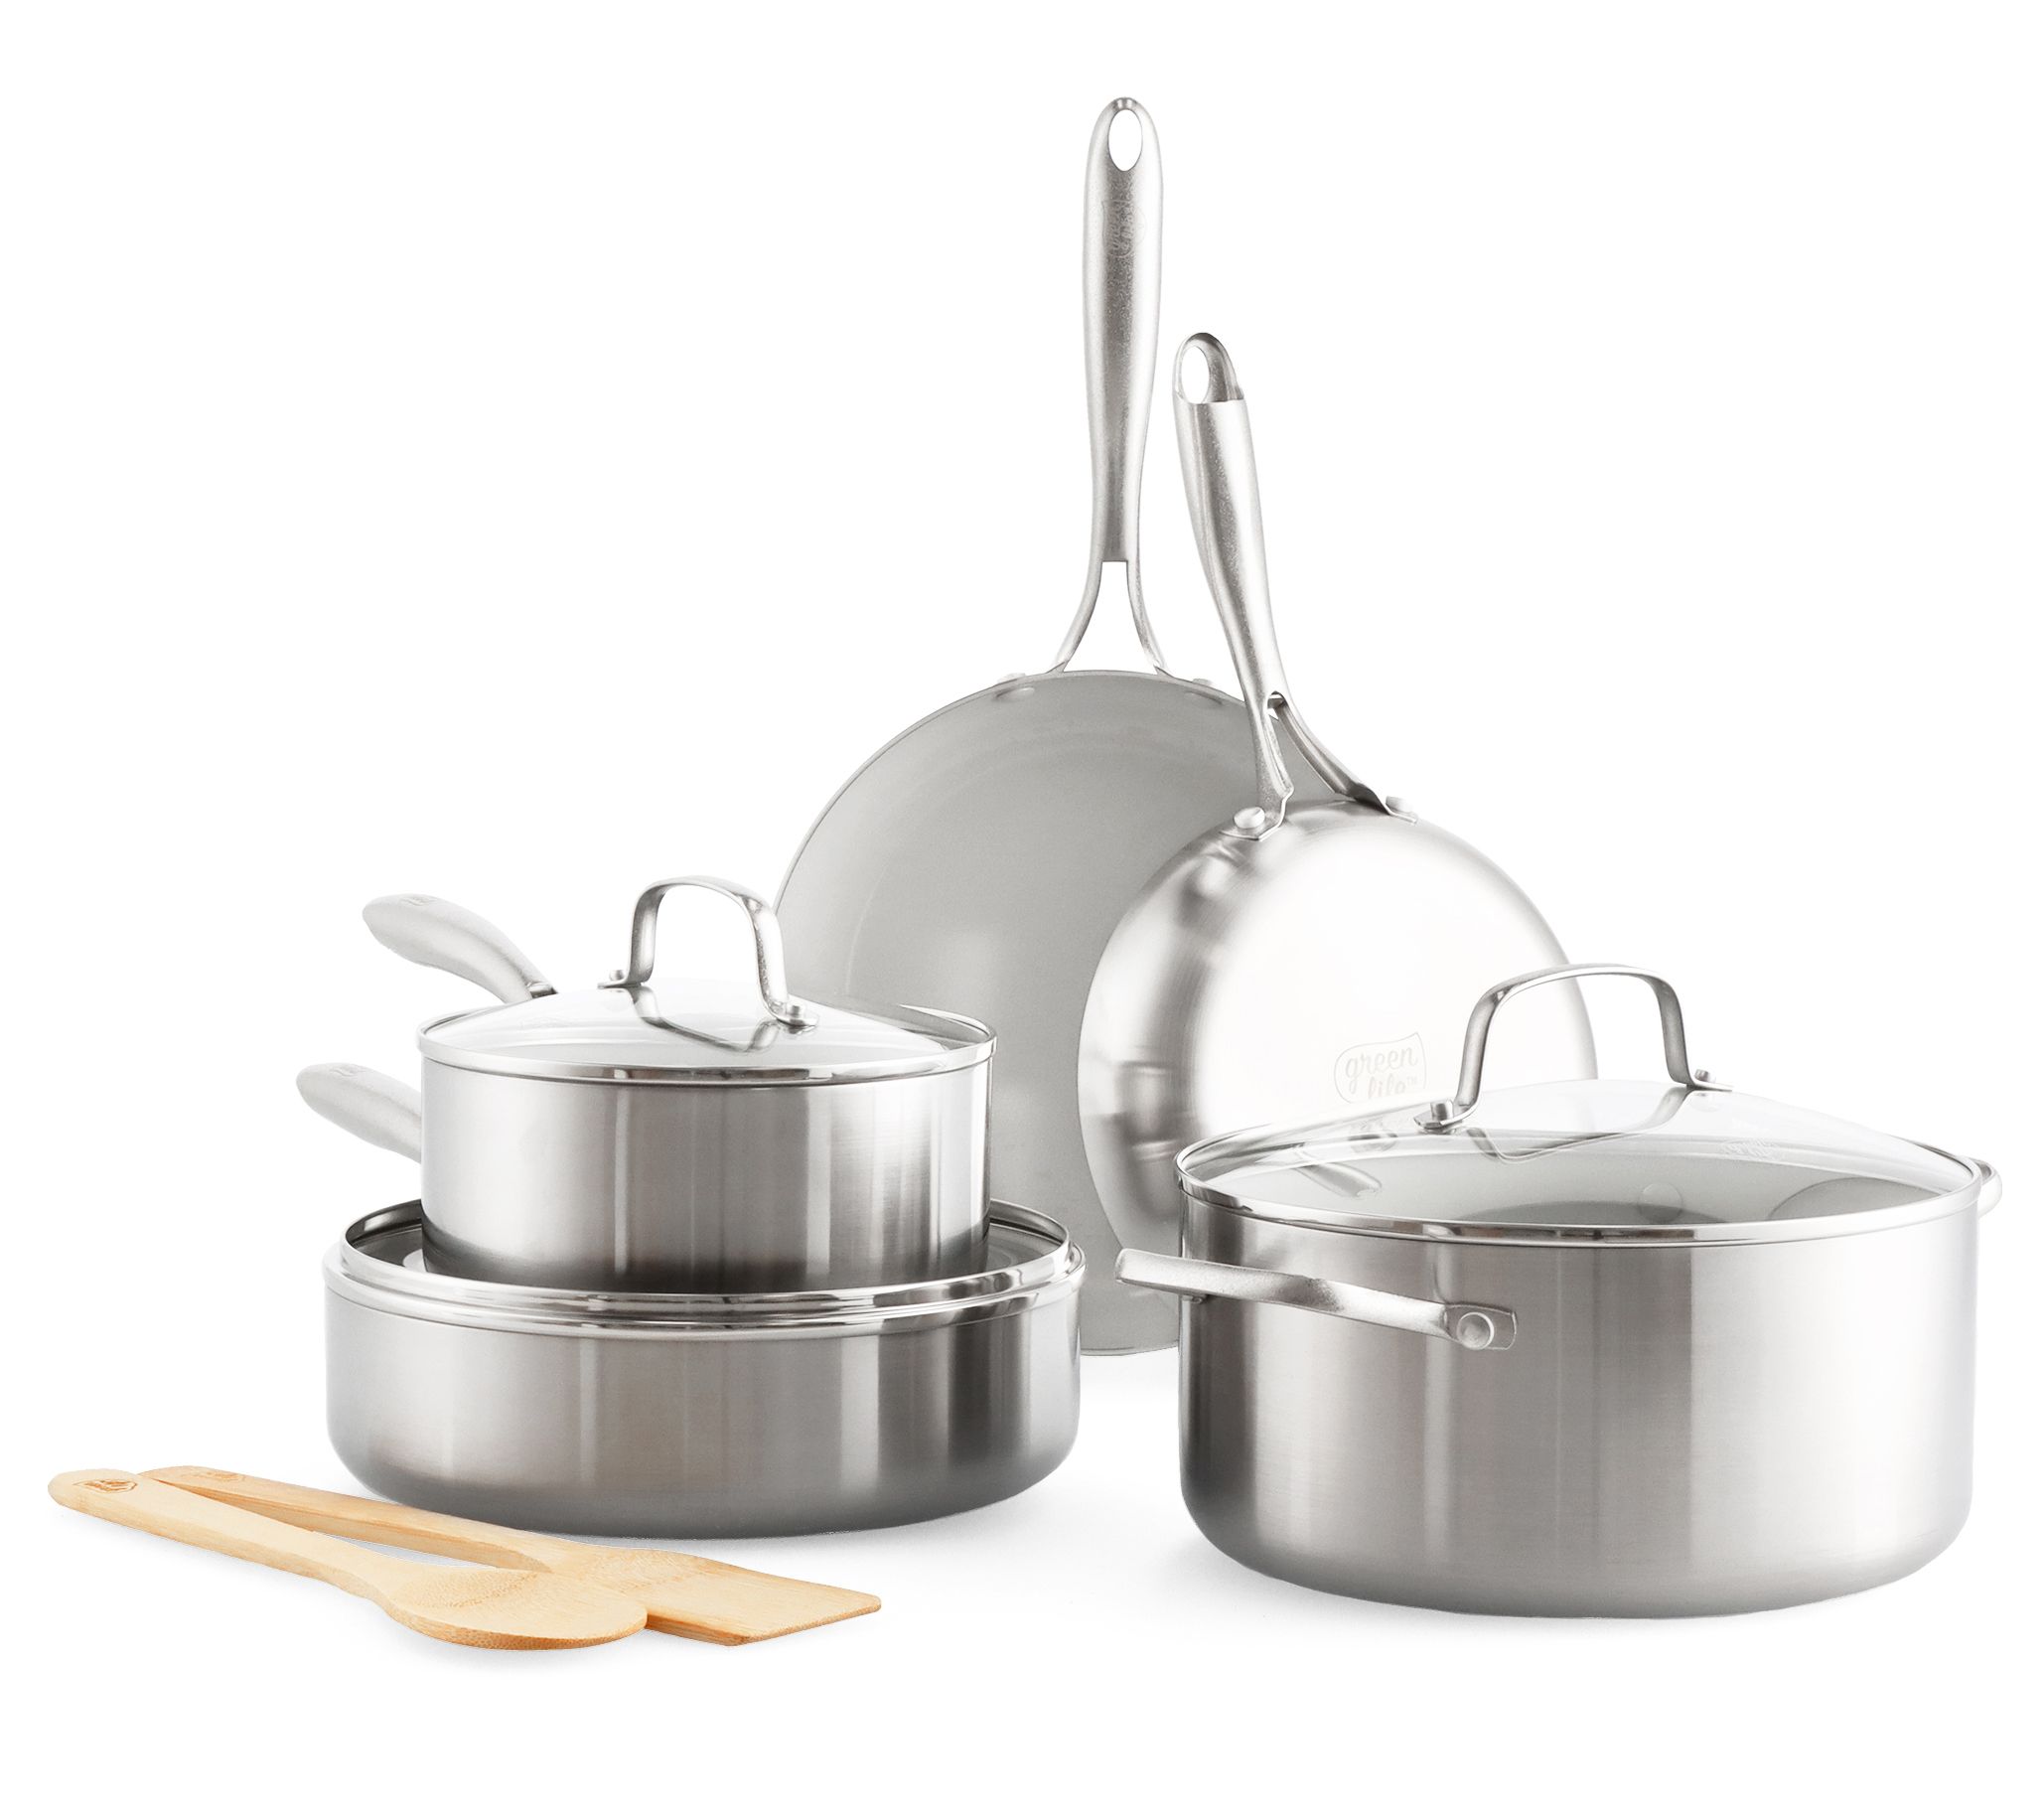 GreenLife 10-Piece Stainless Steel Cookware Set 